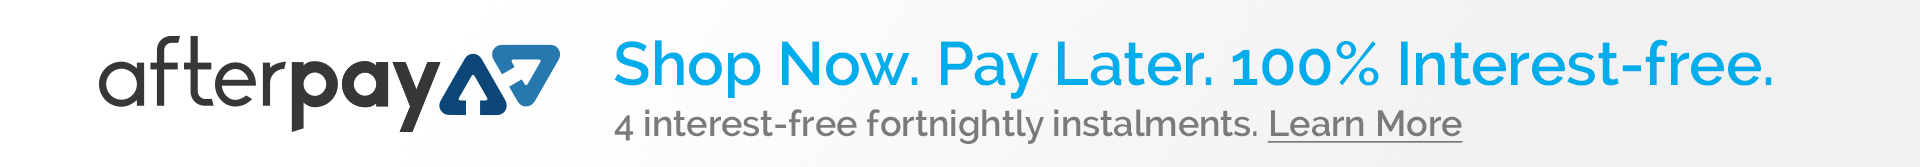 4 interest-free payments fortnightly